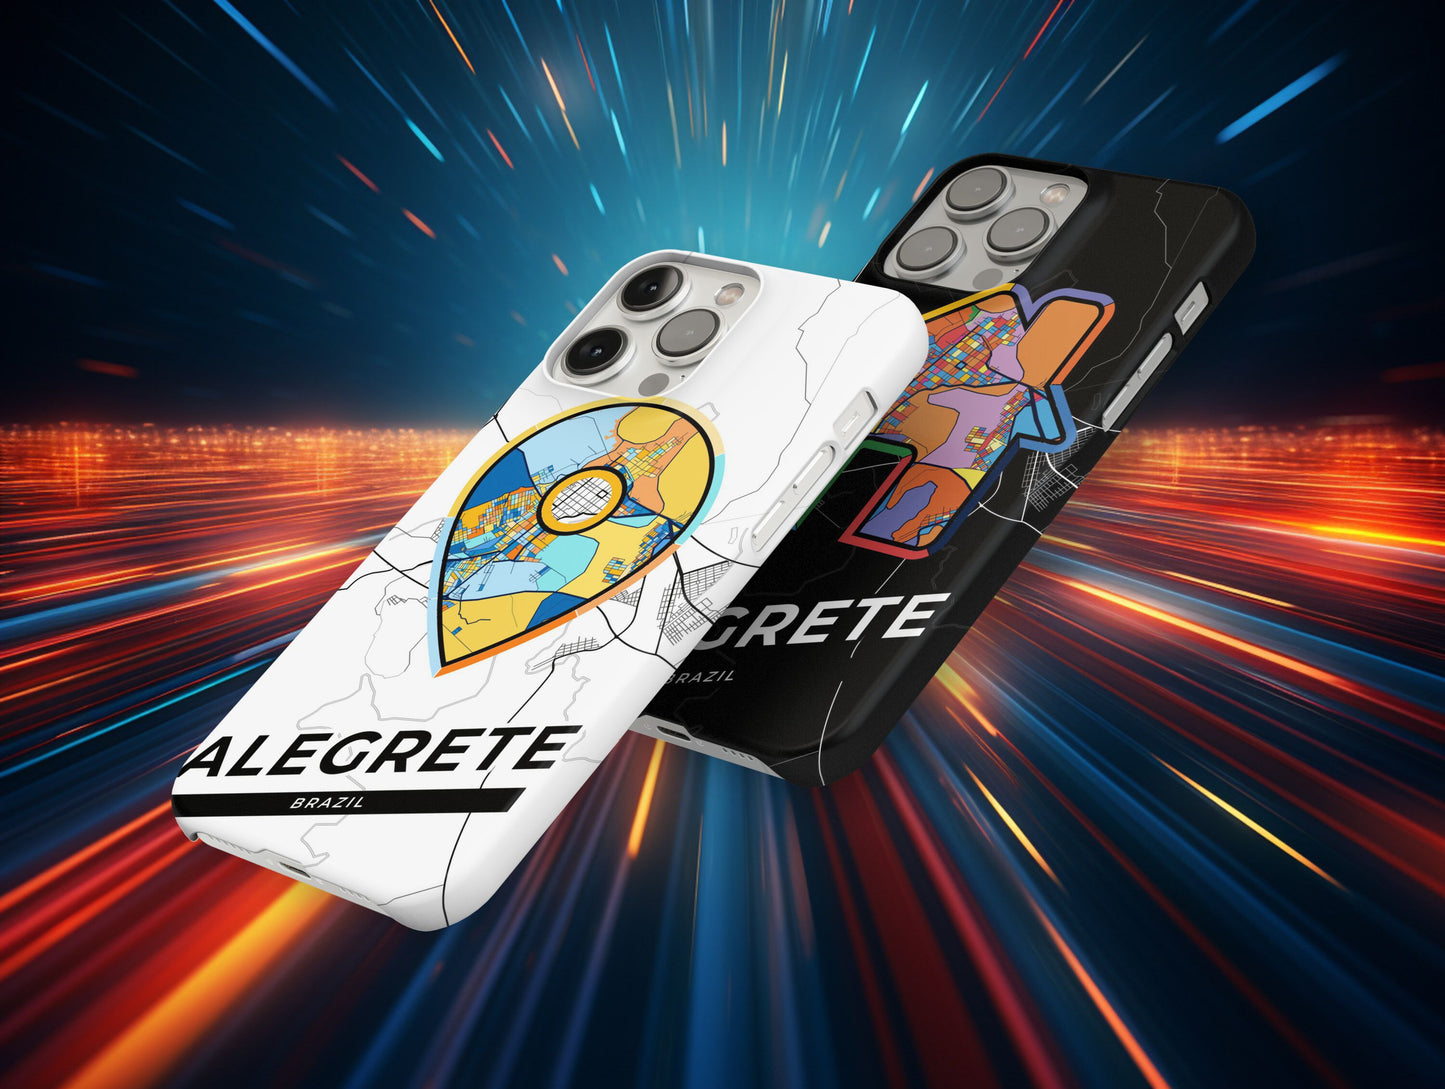 Alegrete Brazil slim phone case with colorful icon. Birthday, wedding or housewarming gift. Couple match cases.